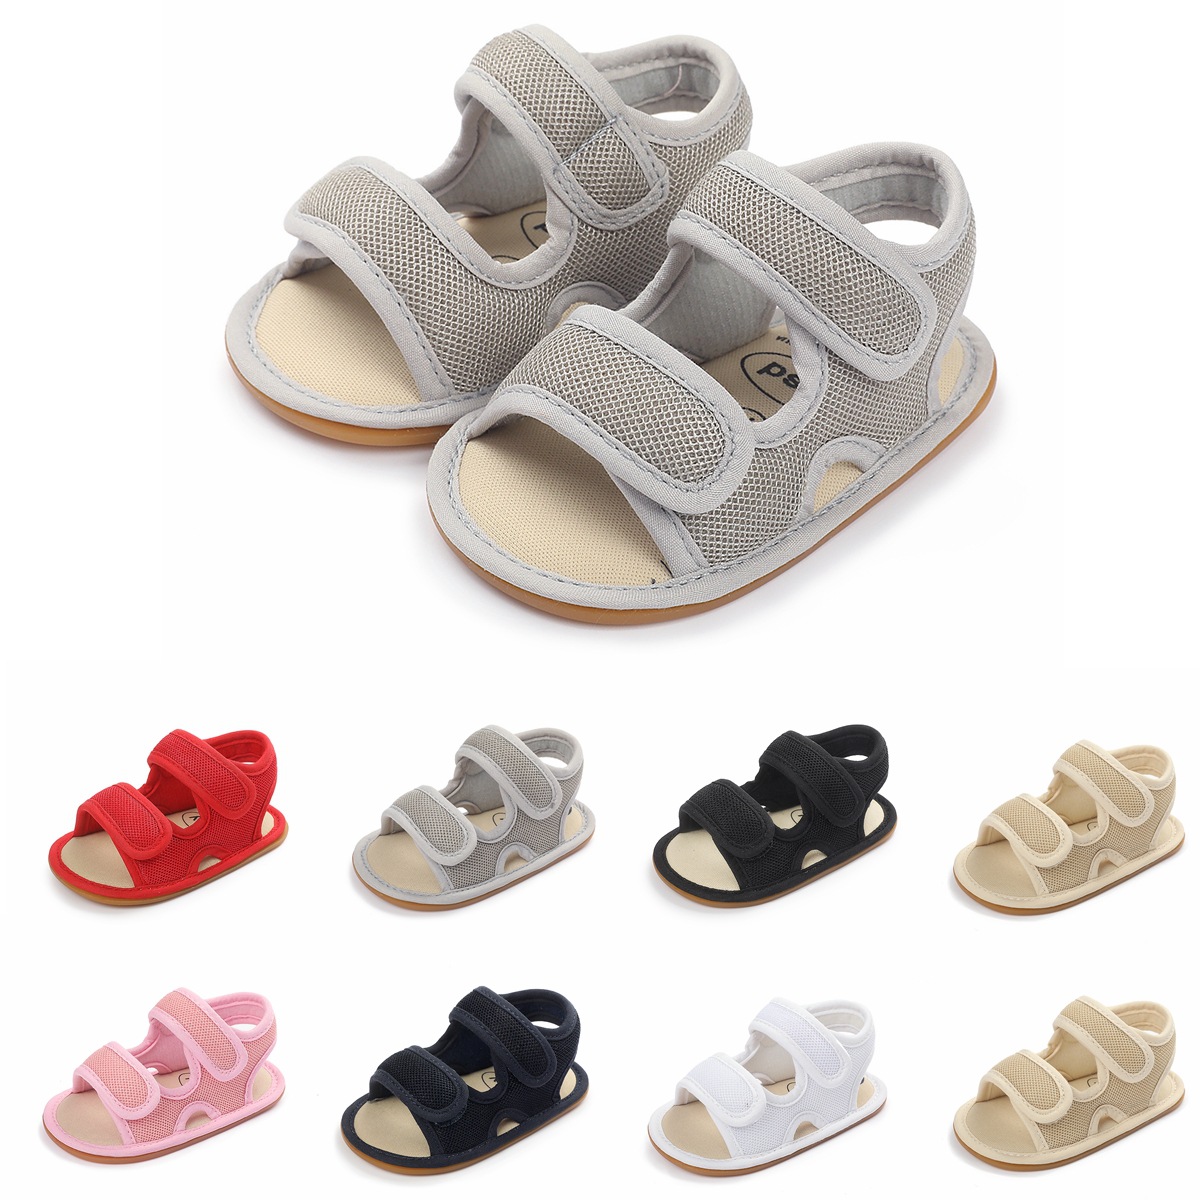 0-1 years old, mesh rubber sole sandals,...